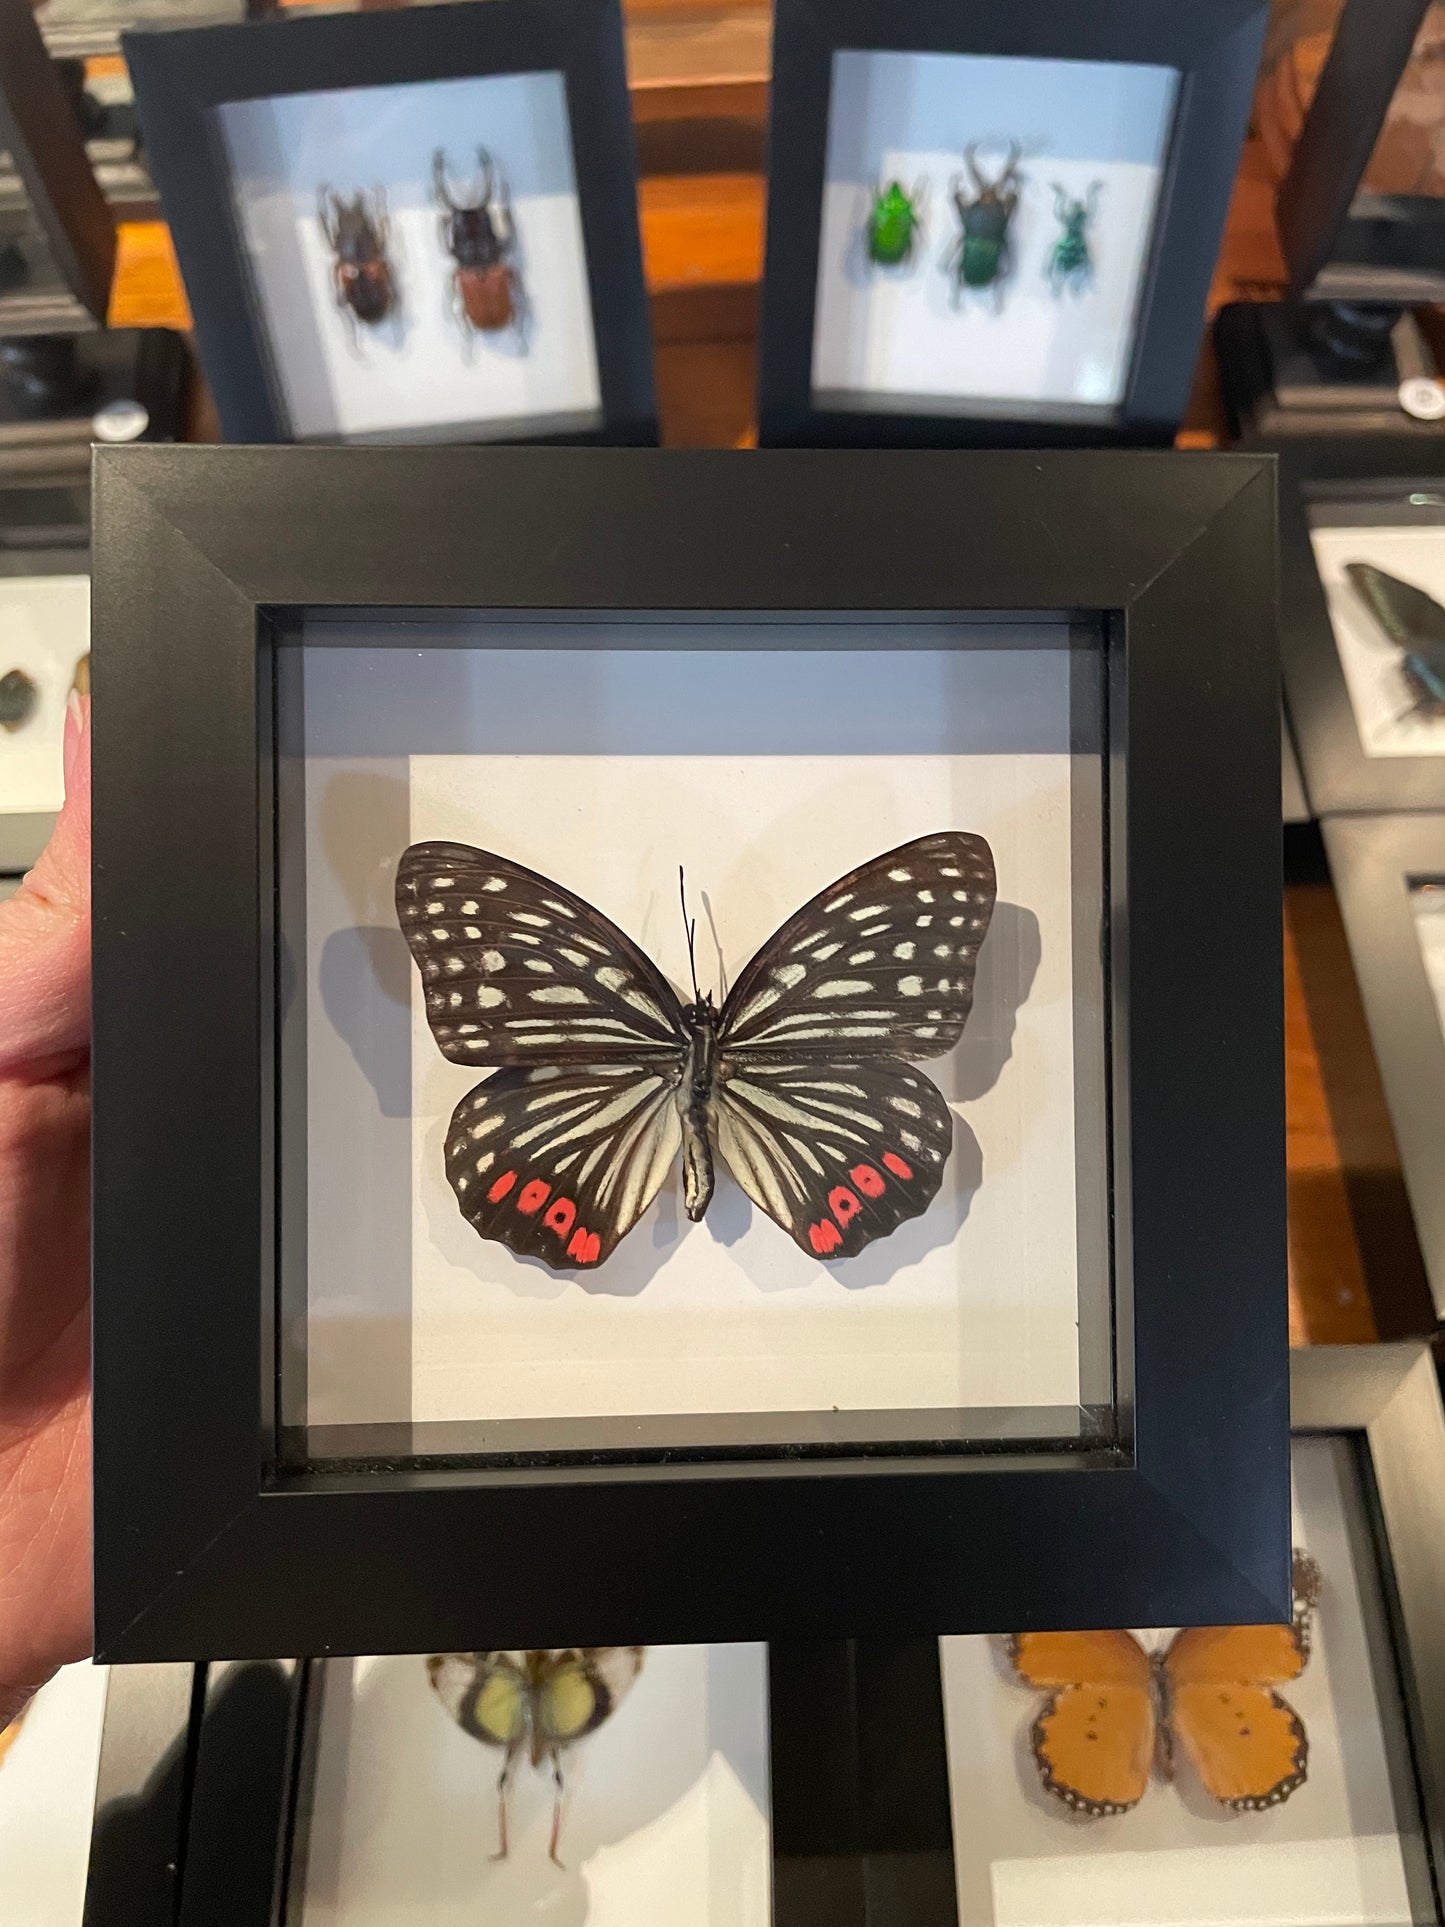 Butterflies/beetles/insects in small frame